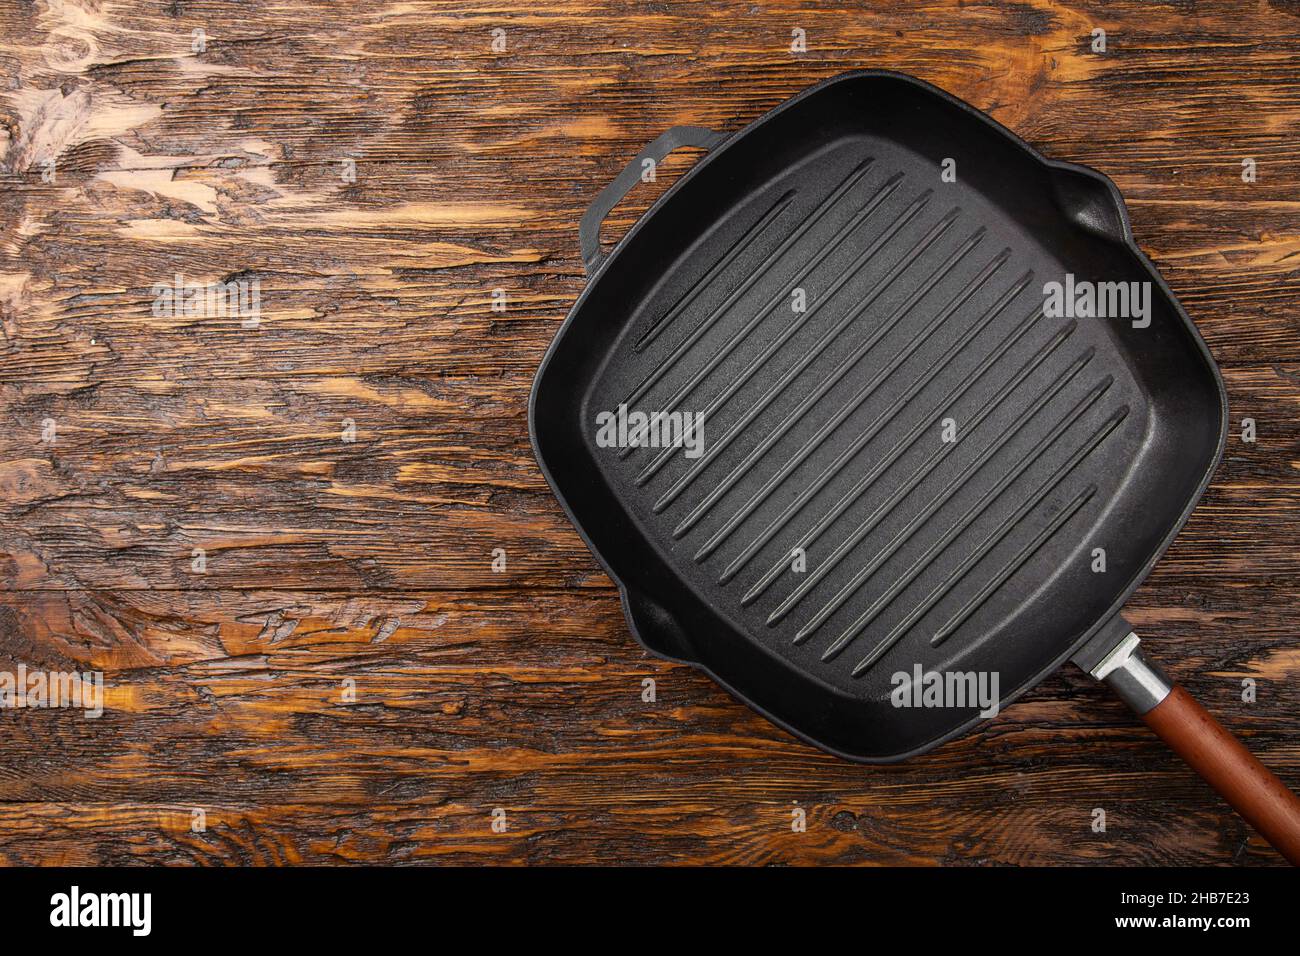 https://c8.alamy.com/comp/2HB7E23/an-empty-black-cast-iron-grill-pan-for-cooking-delicious-meat-wood-background-space-for-text-top-view-2HB7E23.jpg